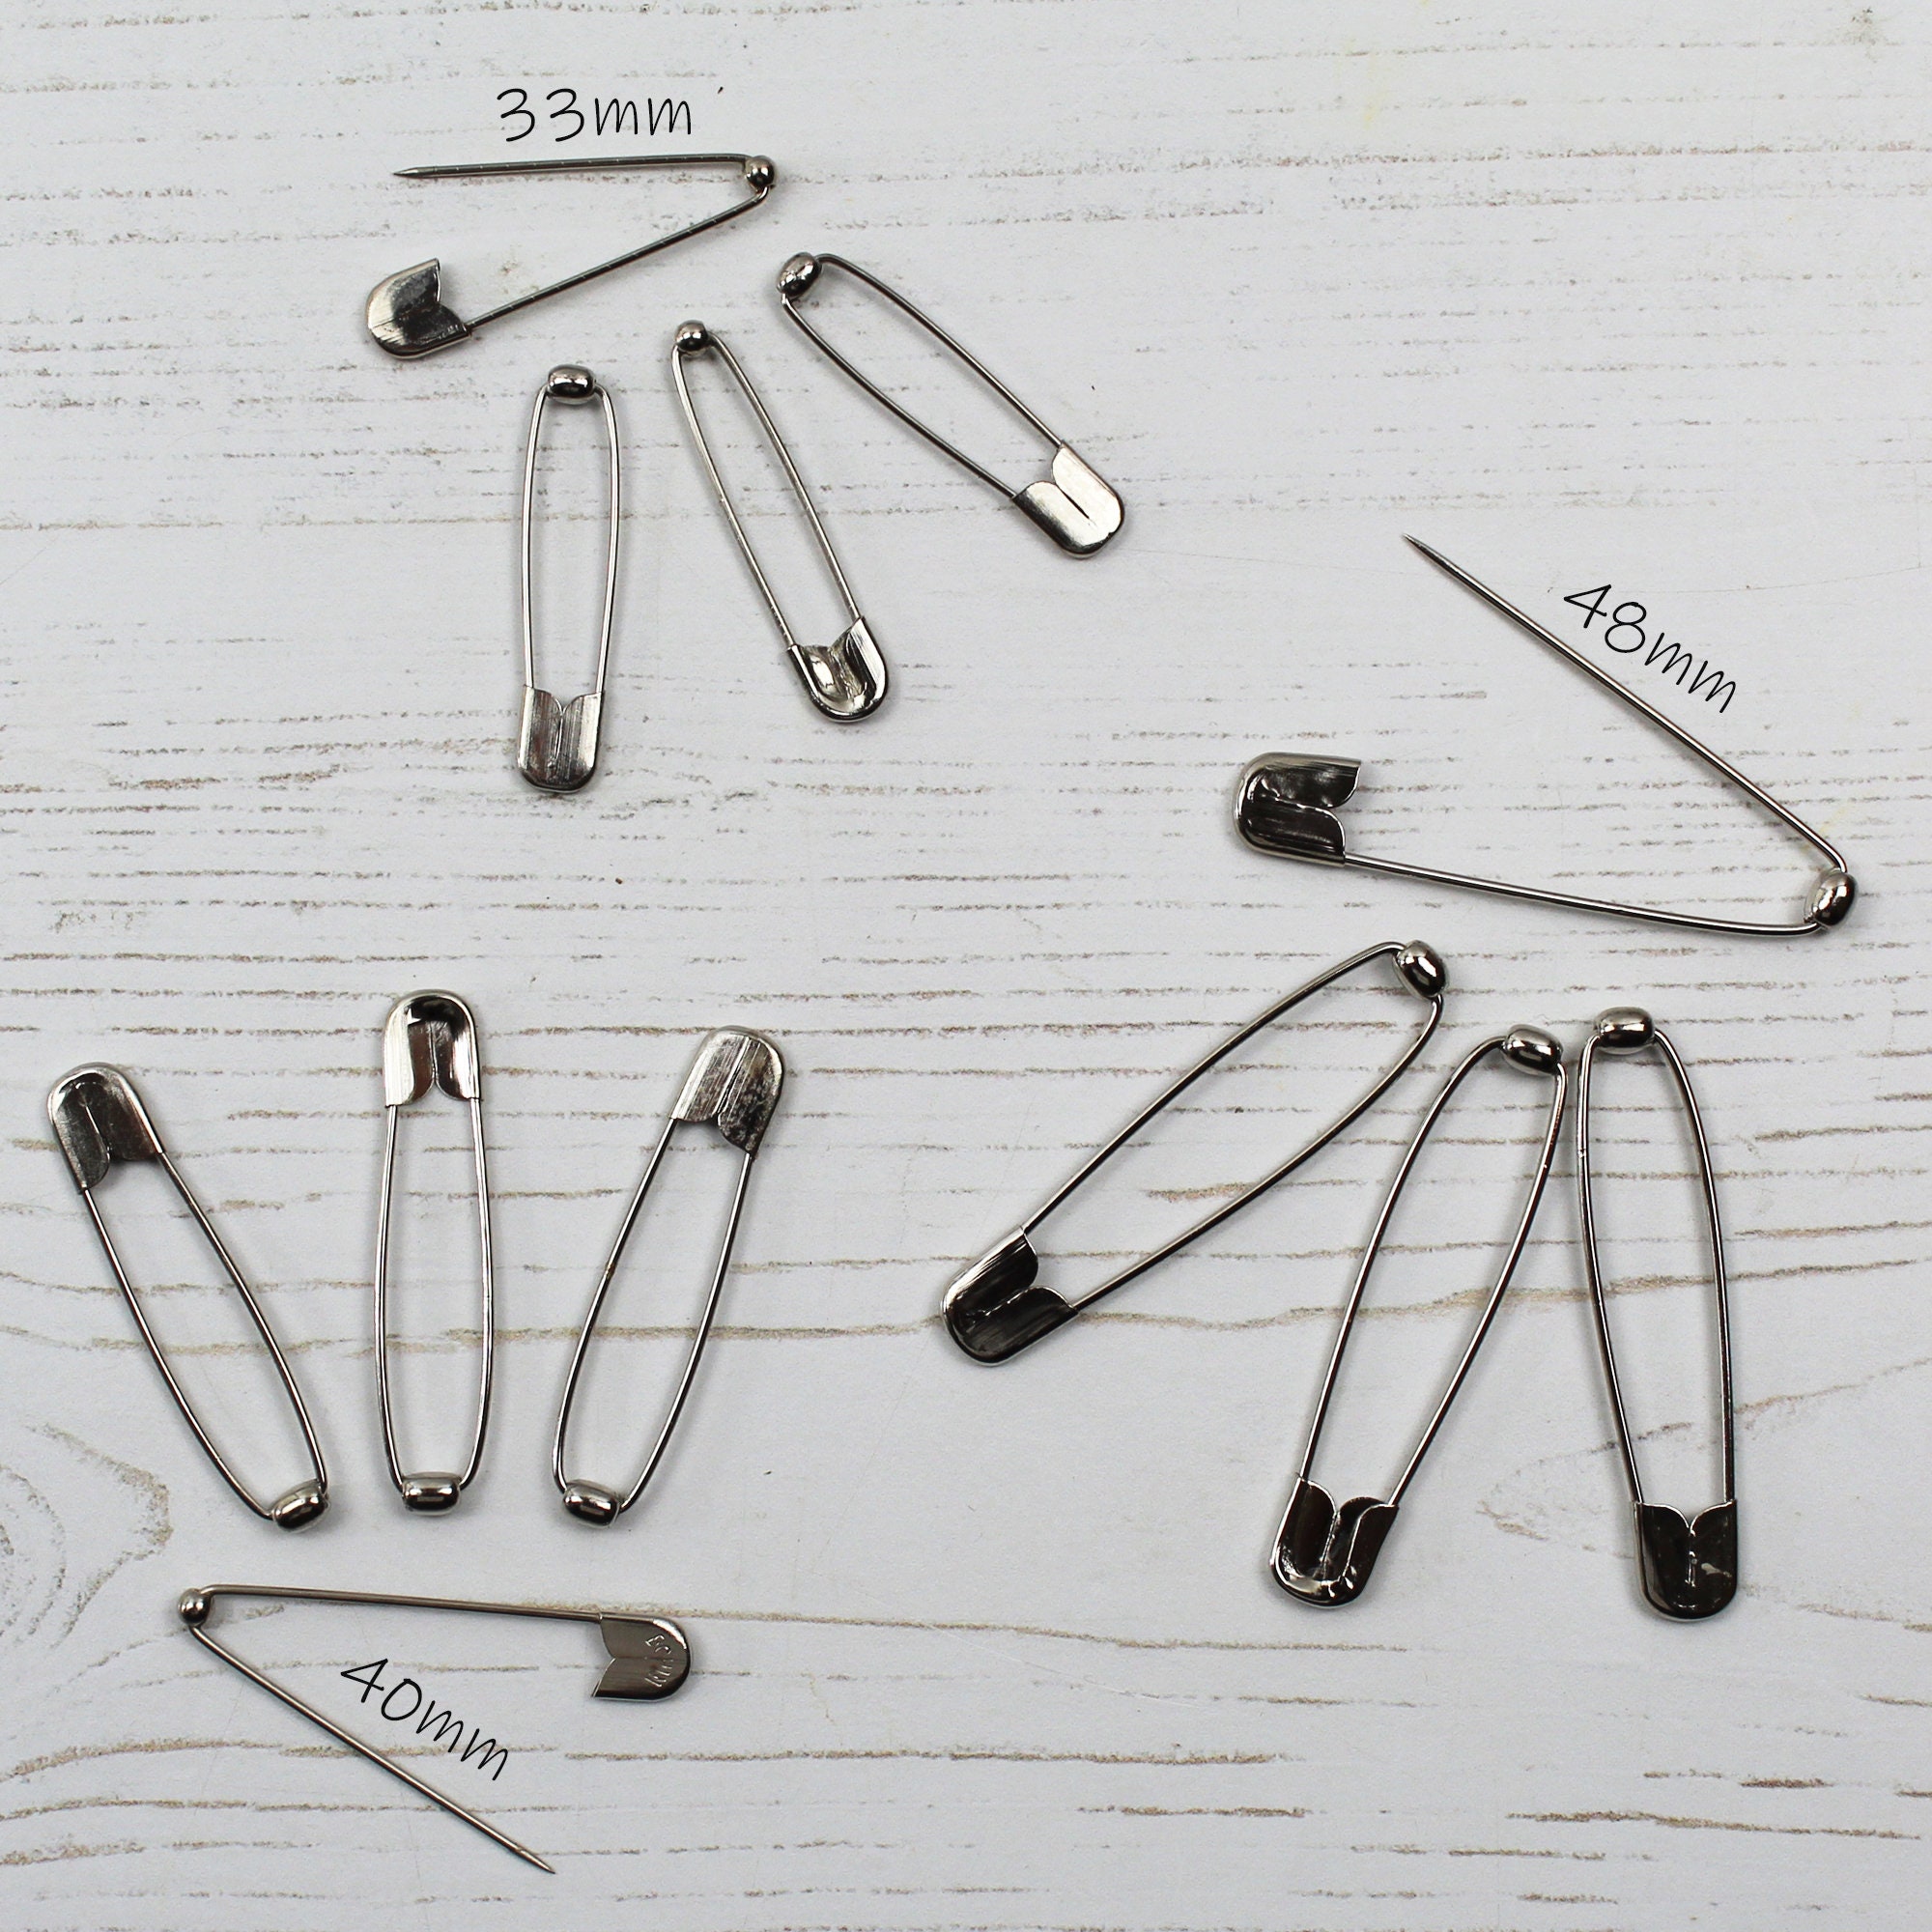 Large Safety Pins in Black, Gold and Silver - China Safety Pins, Black Pin